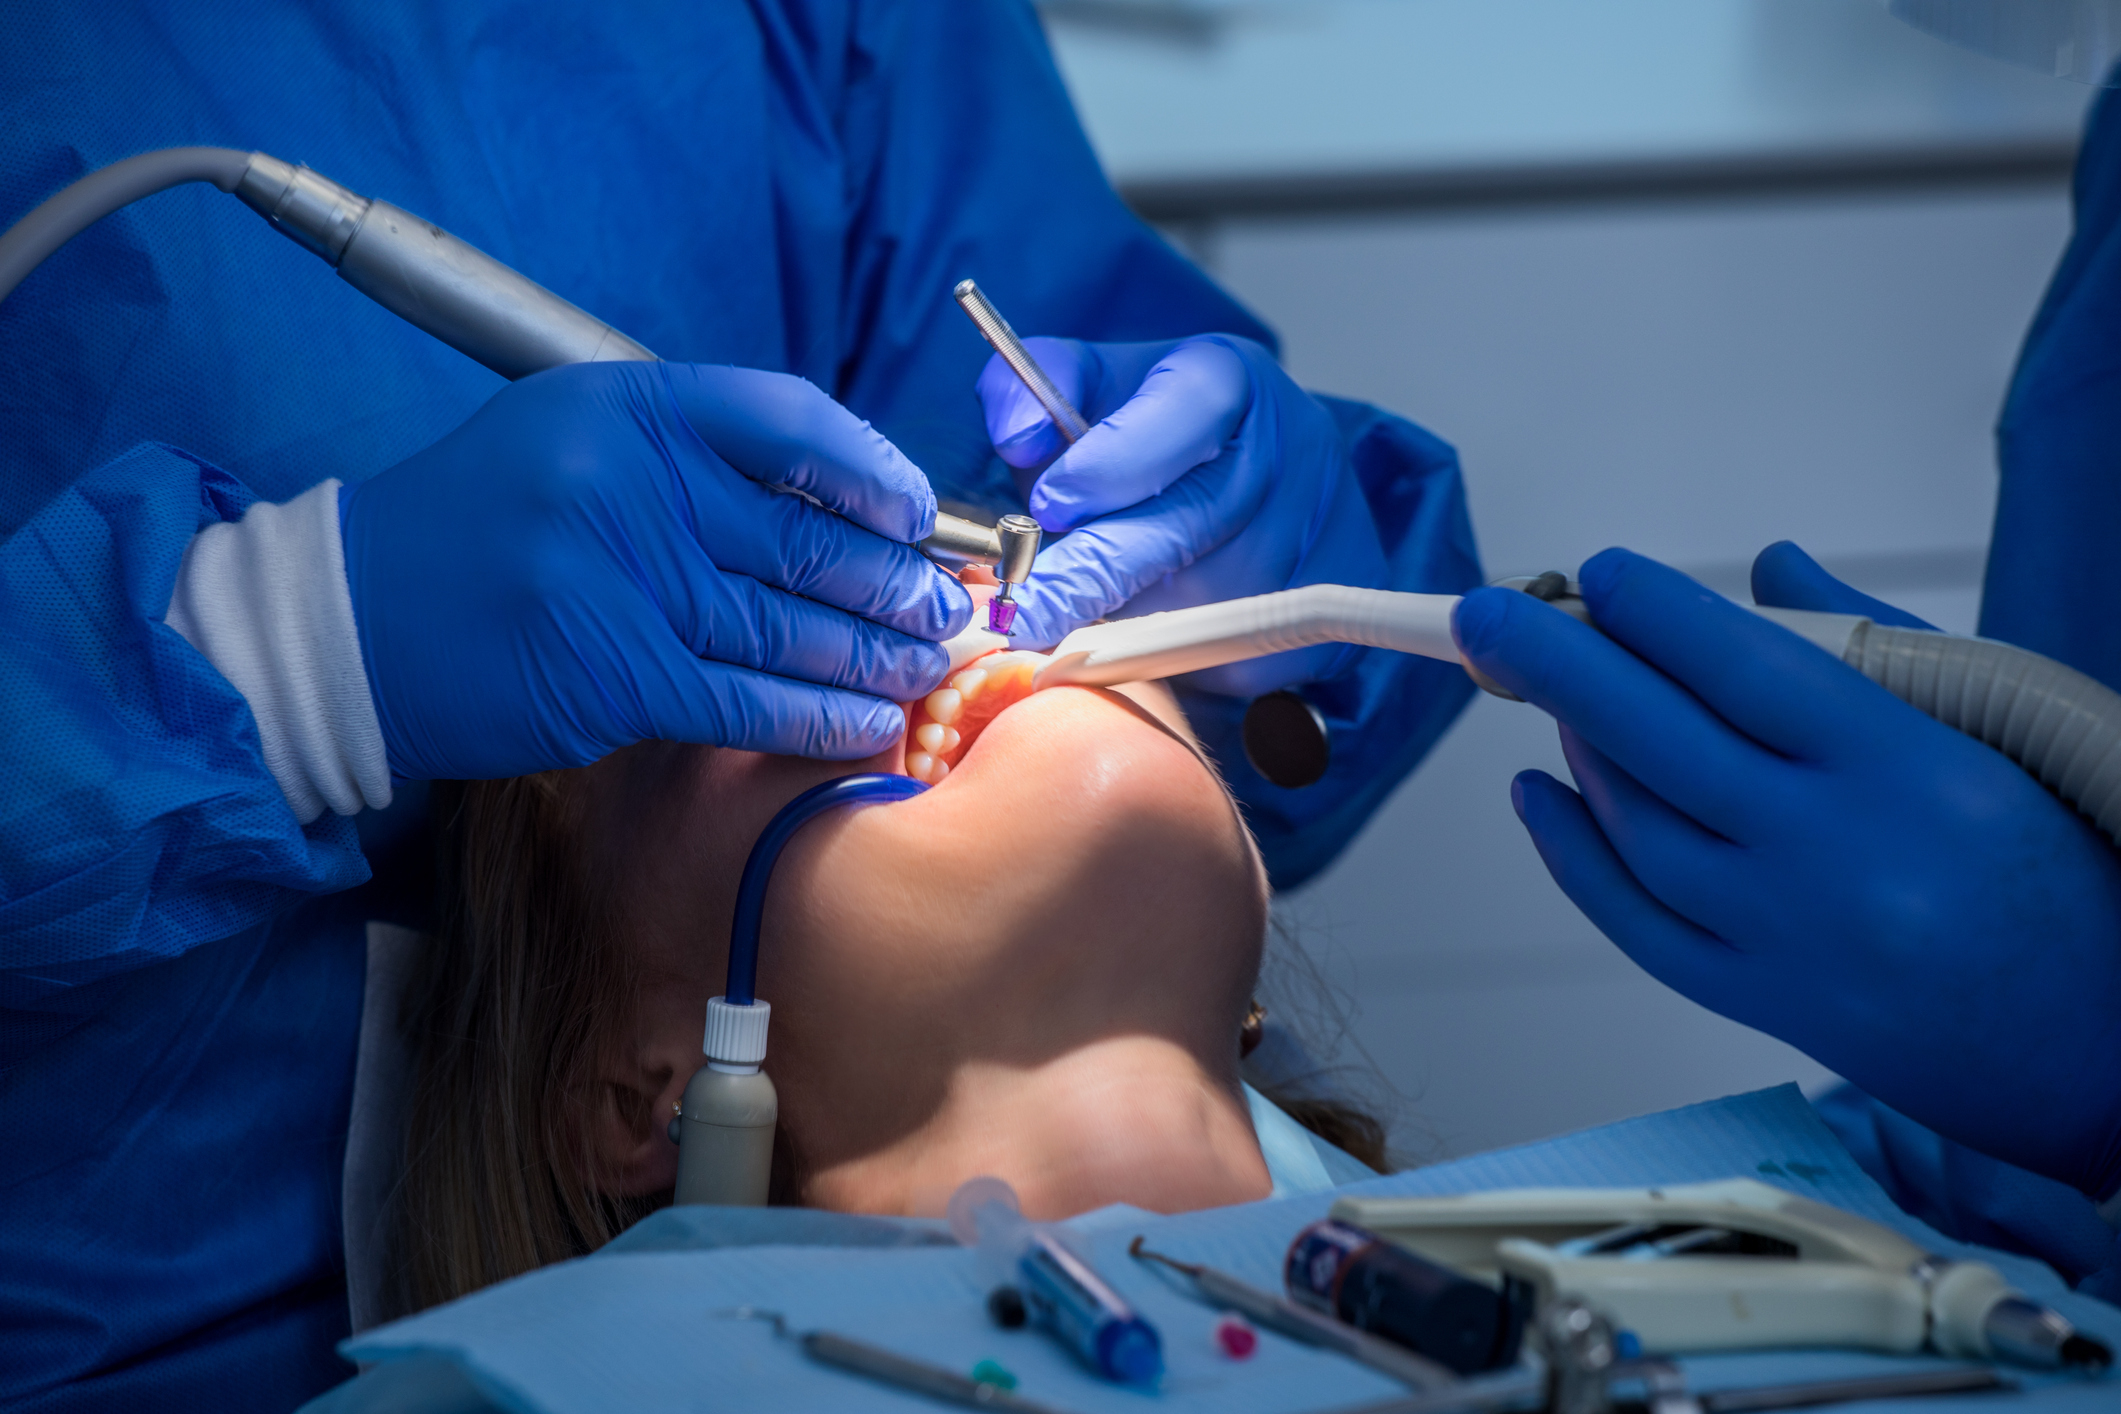 Dentist performing a procedure on a patient with dental tools and overhead light